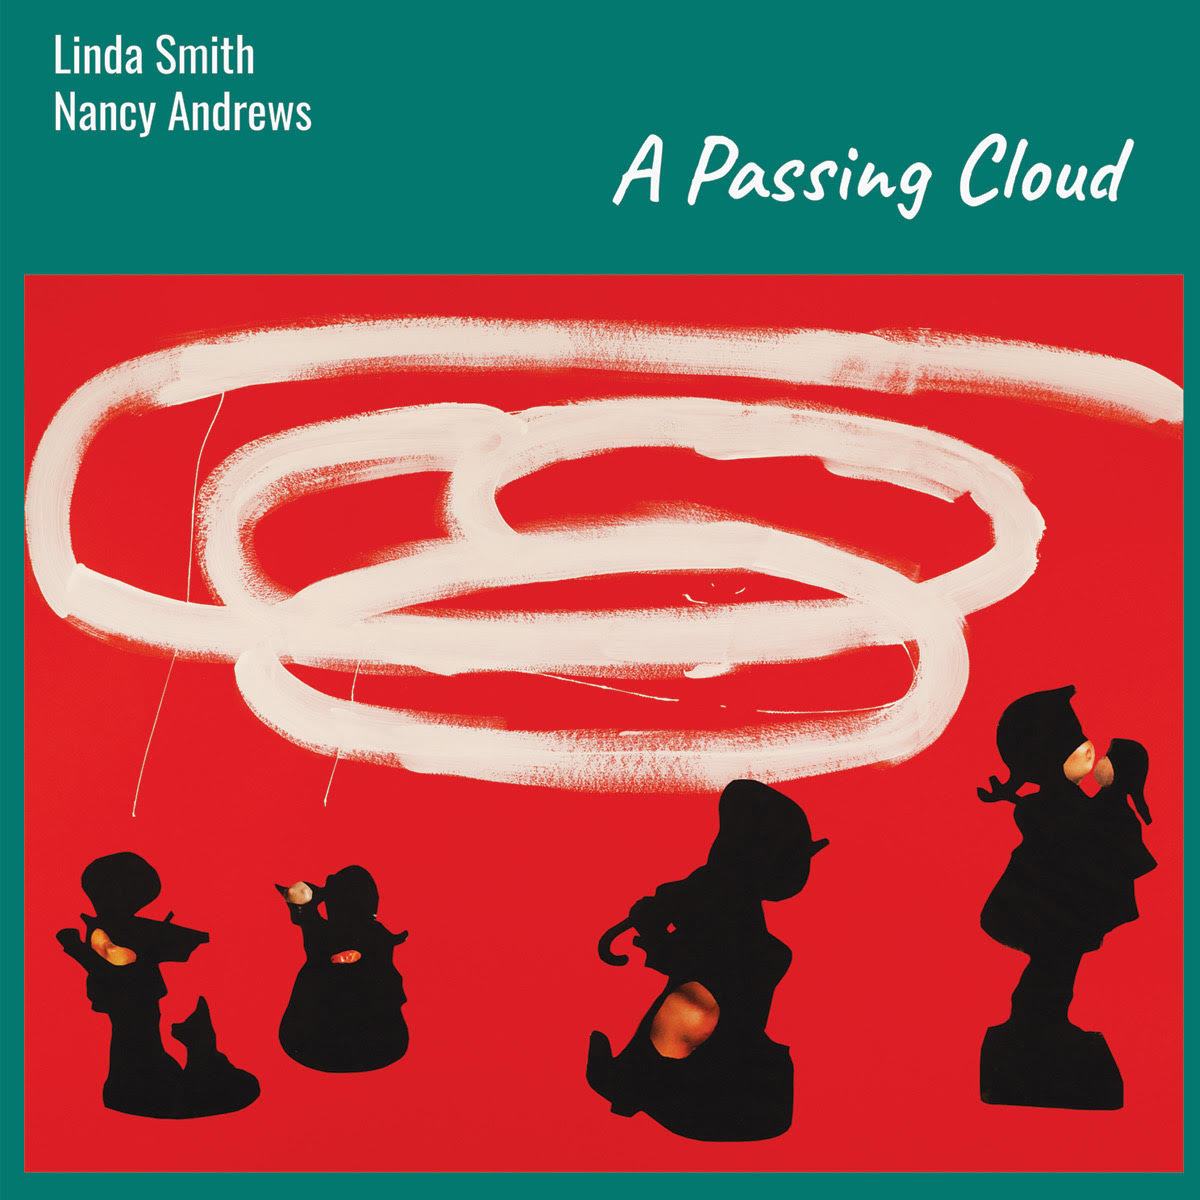 Cover art for "A Passing Cloud" by Linda Smith and Nancy Andrews